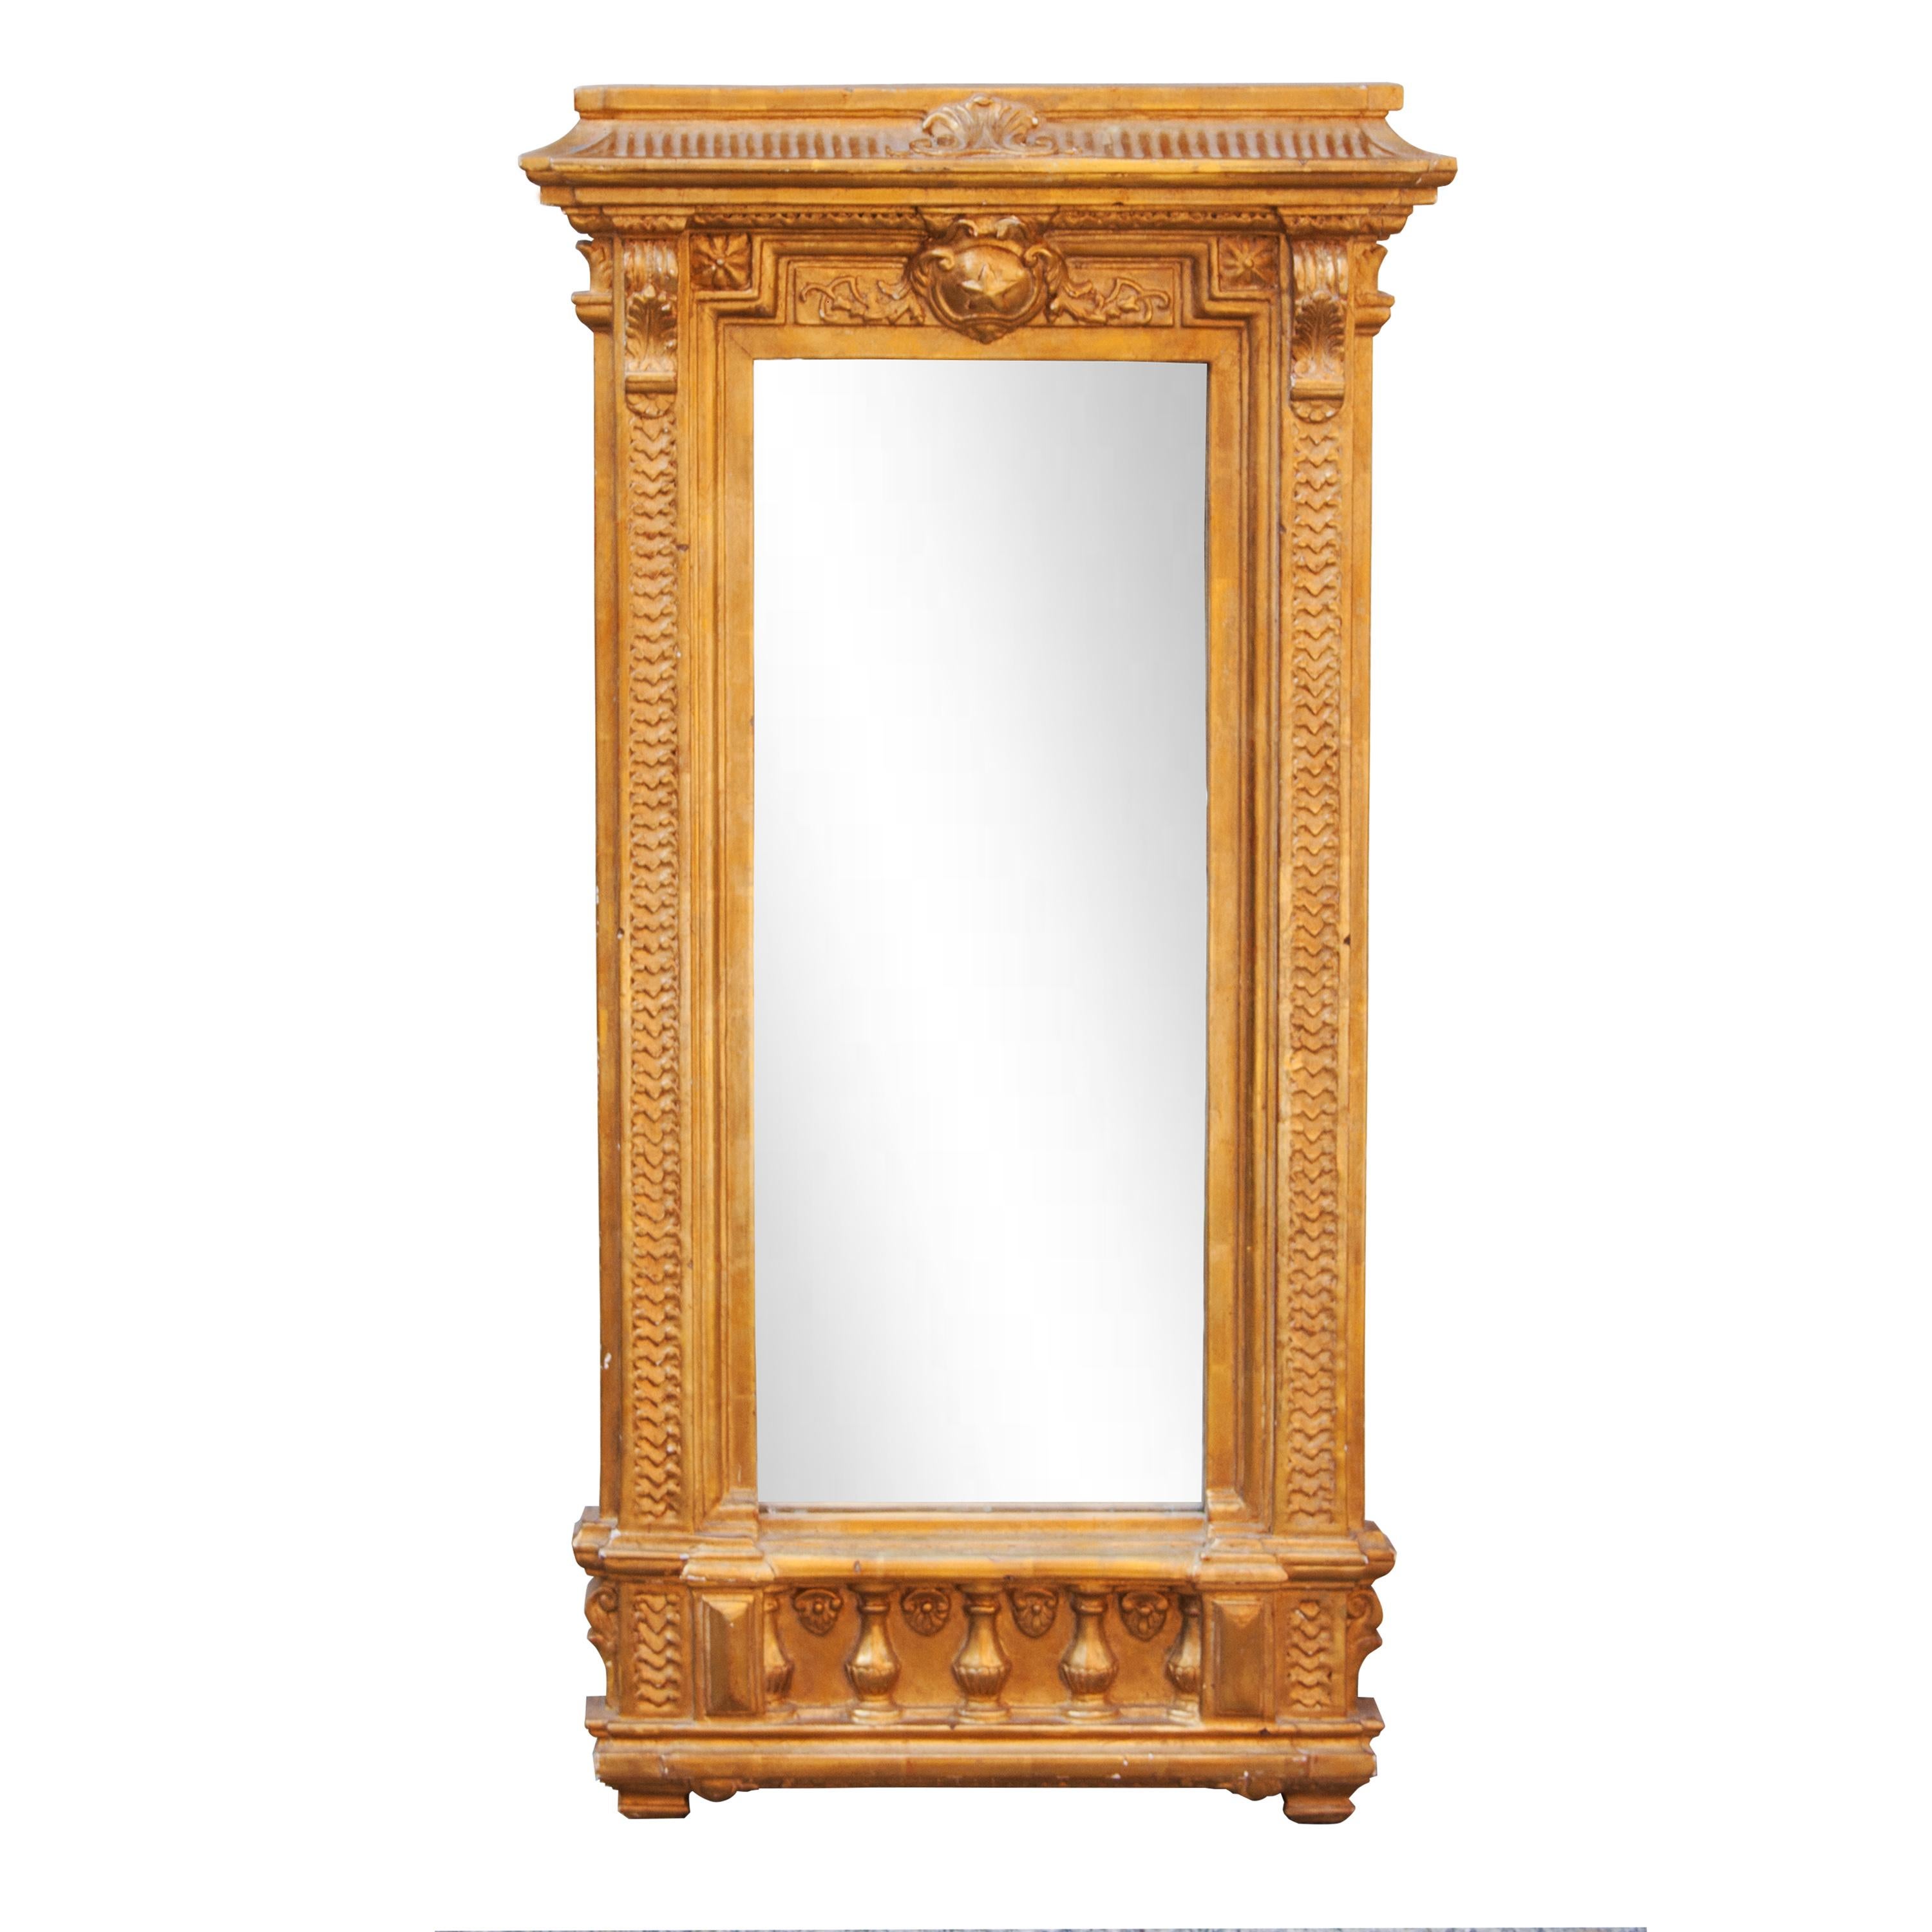 Neoclassical Empire style handcrafted mirror. Rectangular hand carved wooden structure with gold foiled finished.